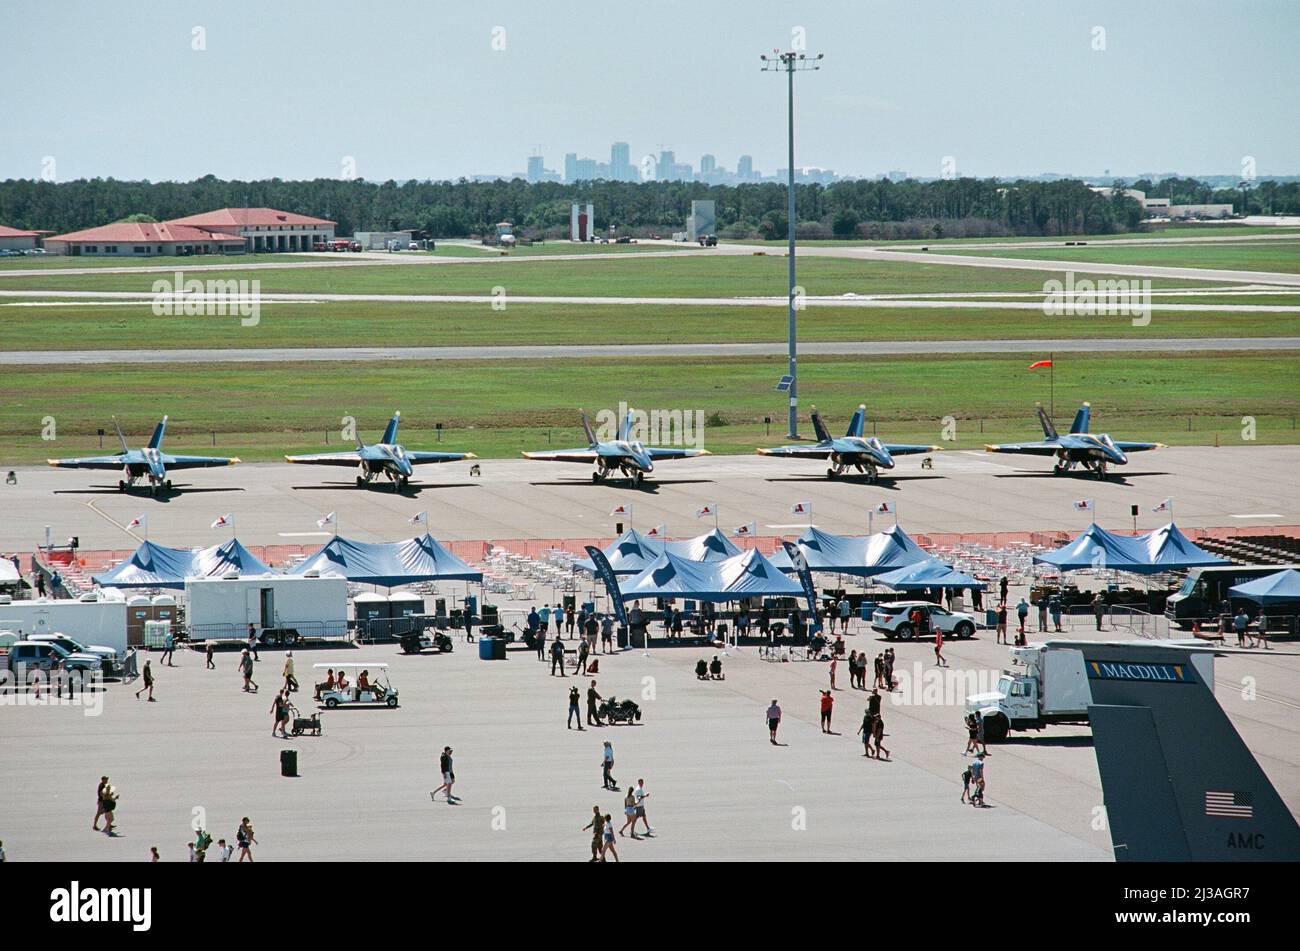 A lineup of F/A-18E Super Hornets assigned to the Blue Angels sit parked on the flight line at MacDill Air Force Base, Florida, March 25, 2022. The Blue Angels headlined Tampa Bay AirFest where an estimated 185,000 members watched various military and civilian aviation displays. (U.S. Air Force photo by Airman 1st Class Joshua Hastings) Stock Photo